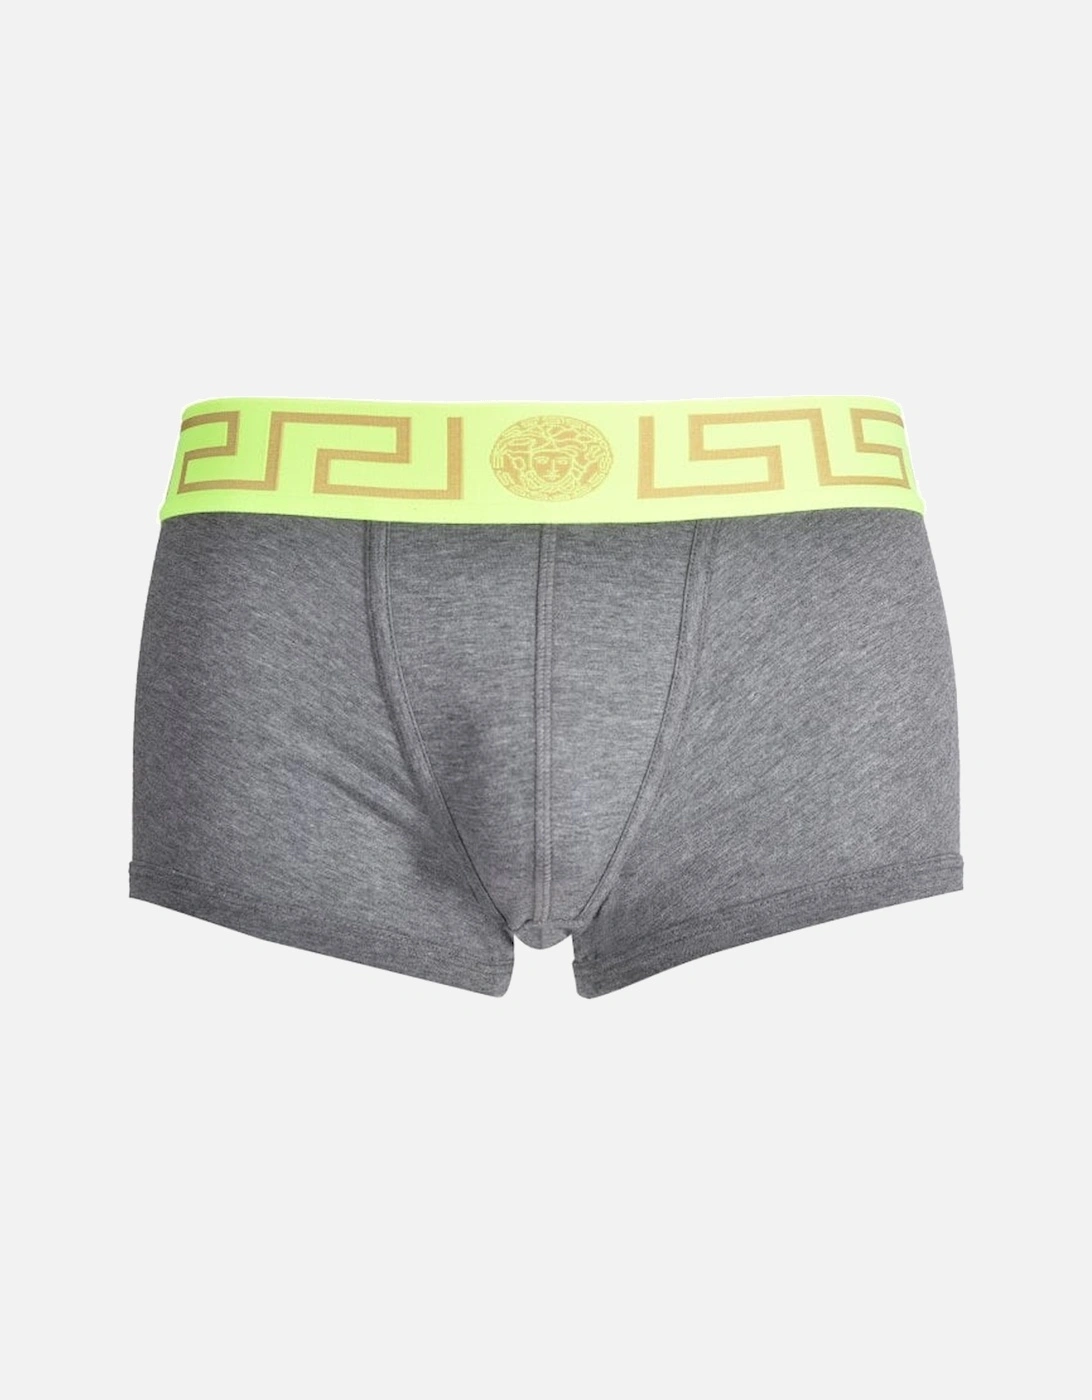 Iconic Greca Low-Rise Boxer Trunk, Grey and Neon Yellow, 5 of 4